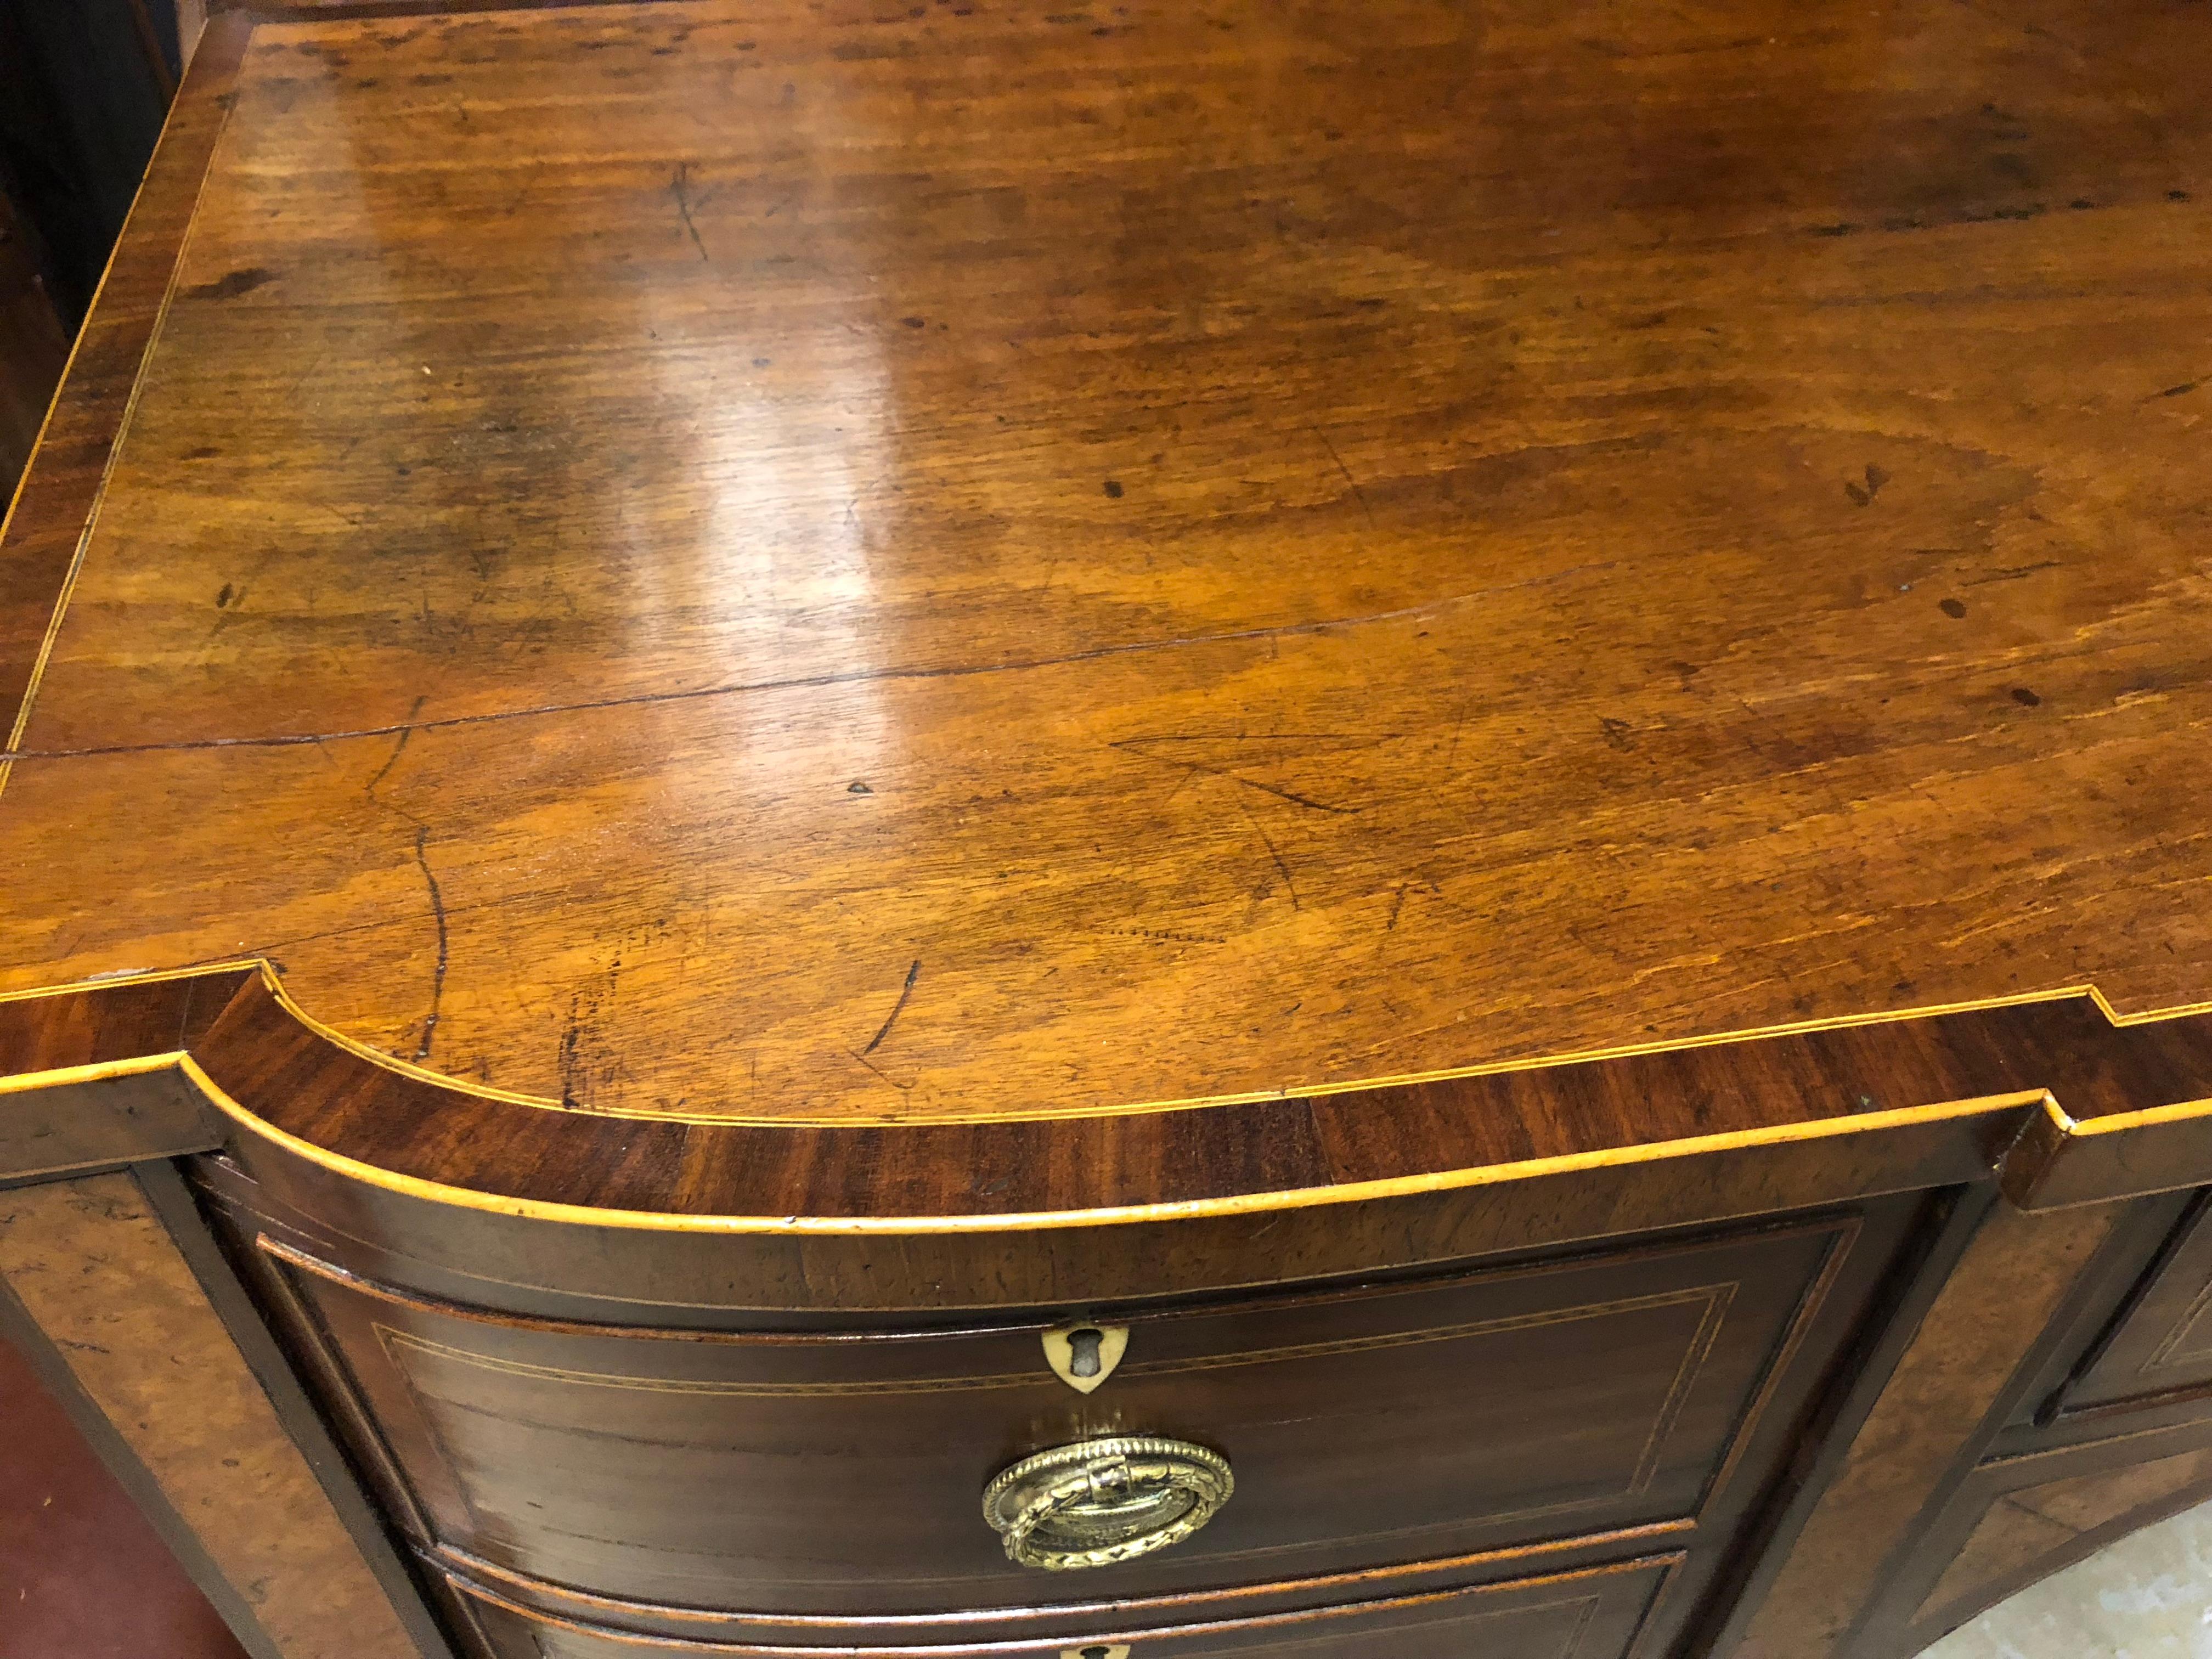 English Regency Sideboard with Fine Inlays, Escutechons, and Banded Top 1